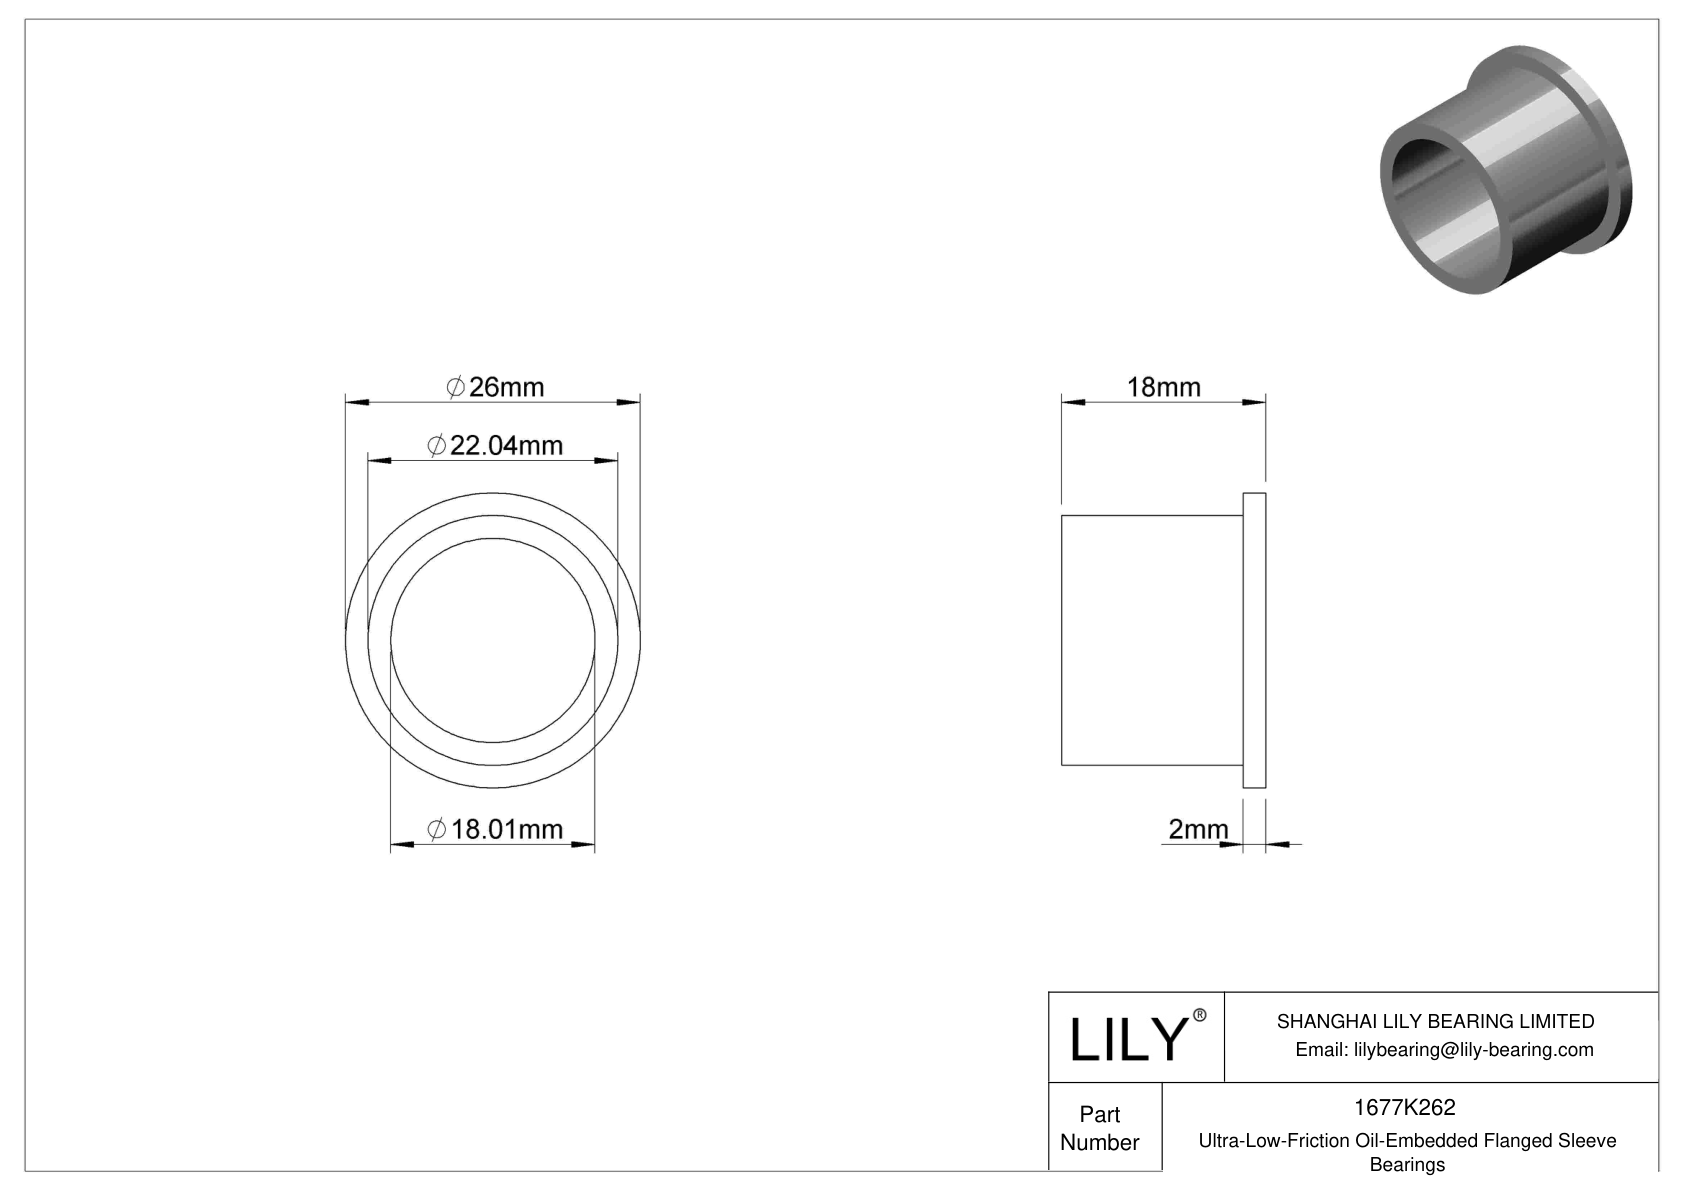 BGHHKCGC Ultra-Low-Friction Oil-Embedded Flanged Sleeve Bearings cad drawing